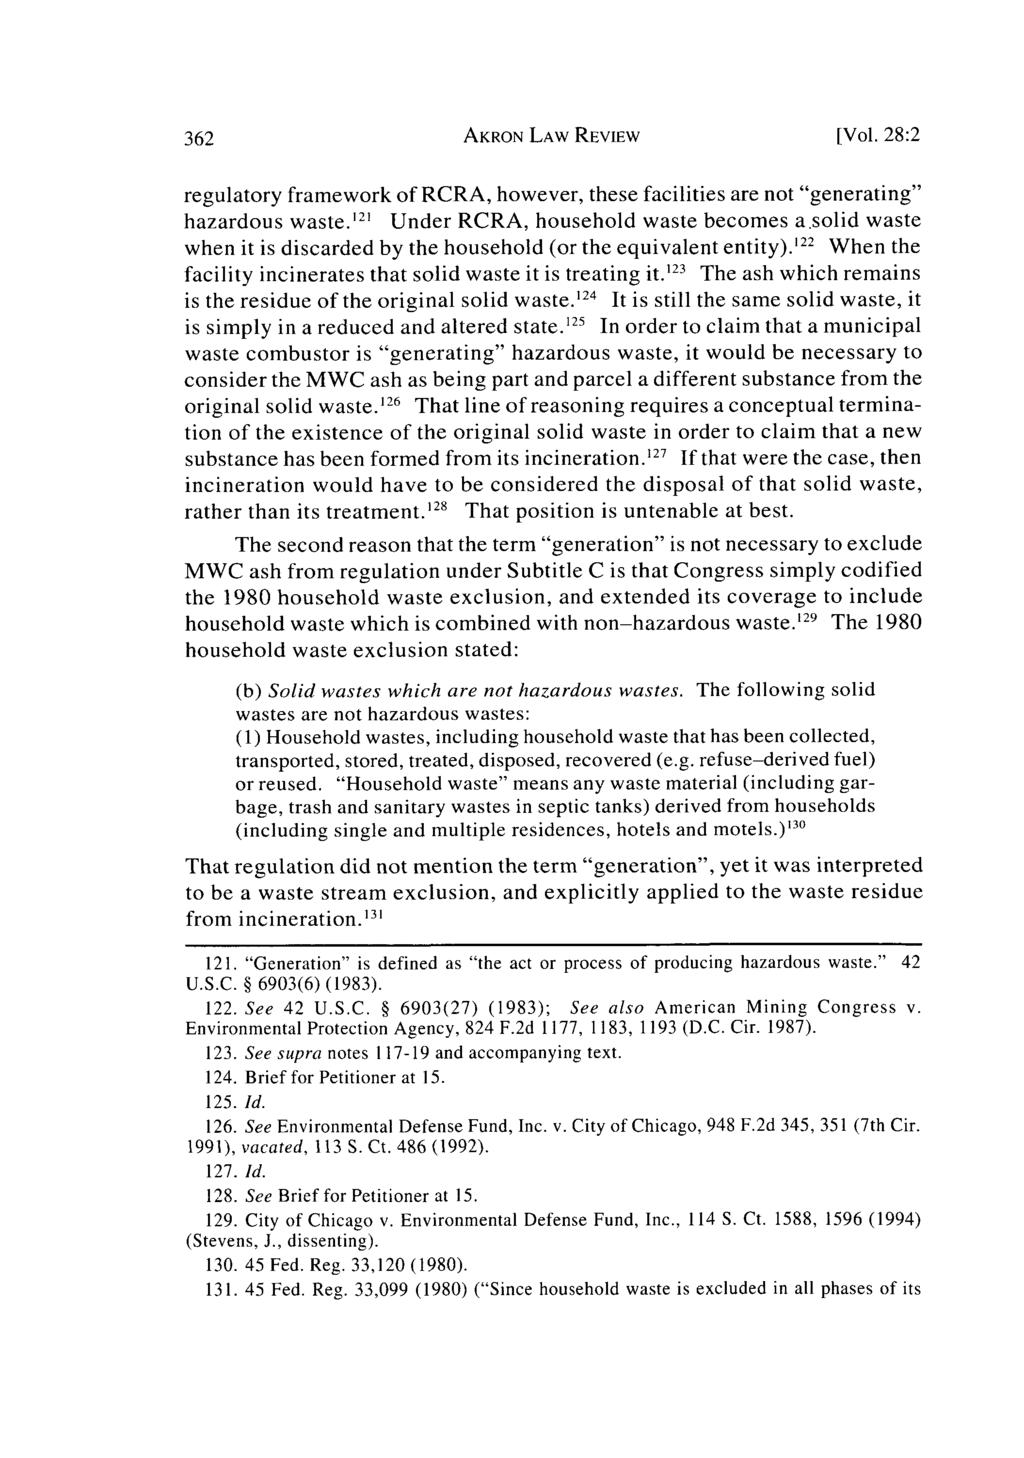 Akron Law Review, Vol. 28 [1995], Iss. 2, Art. 8 AKRON LAW REVIEW [Vol. 28:2 regulatory framework of RCRA, however, these facilities are not "generating" hazardous waste.